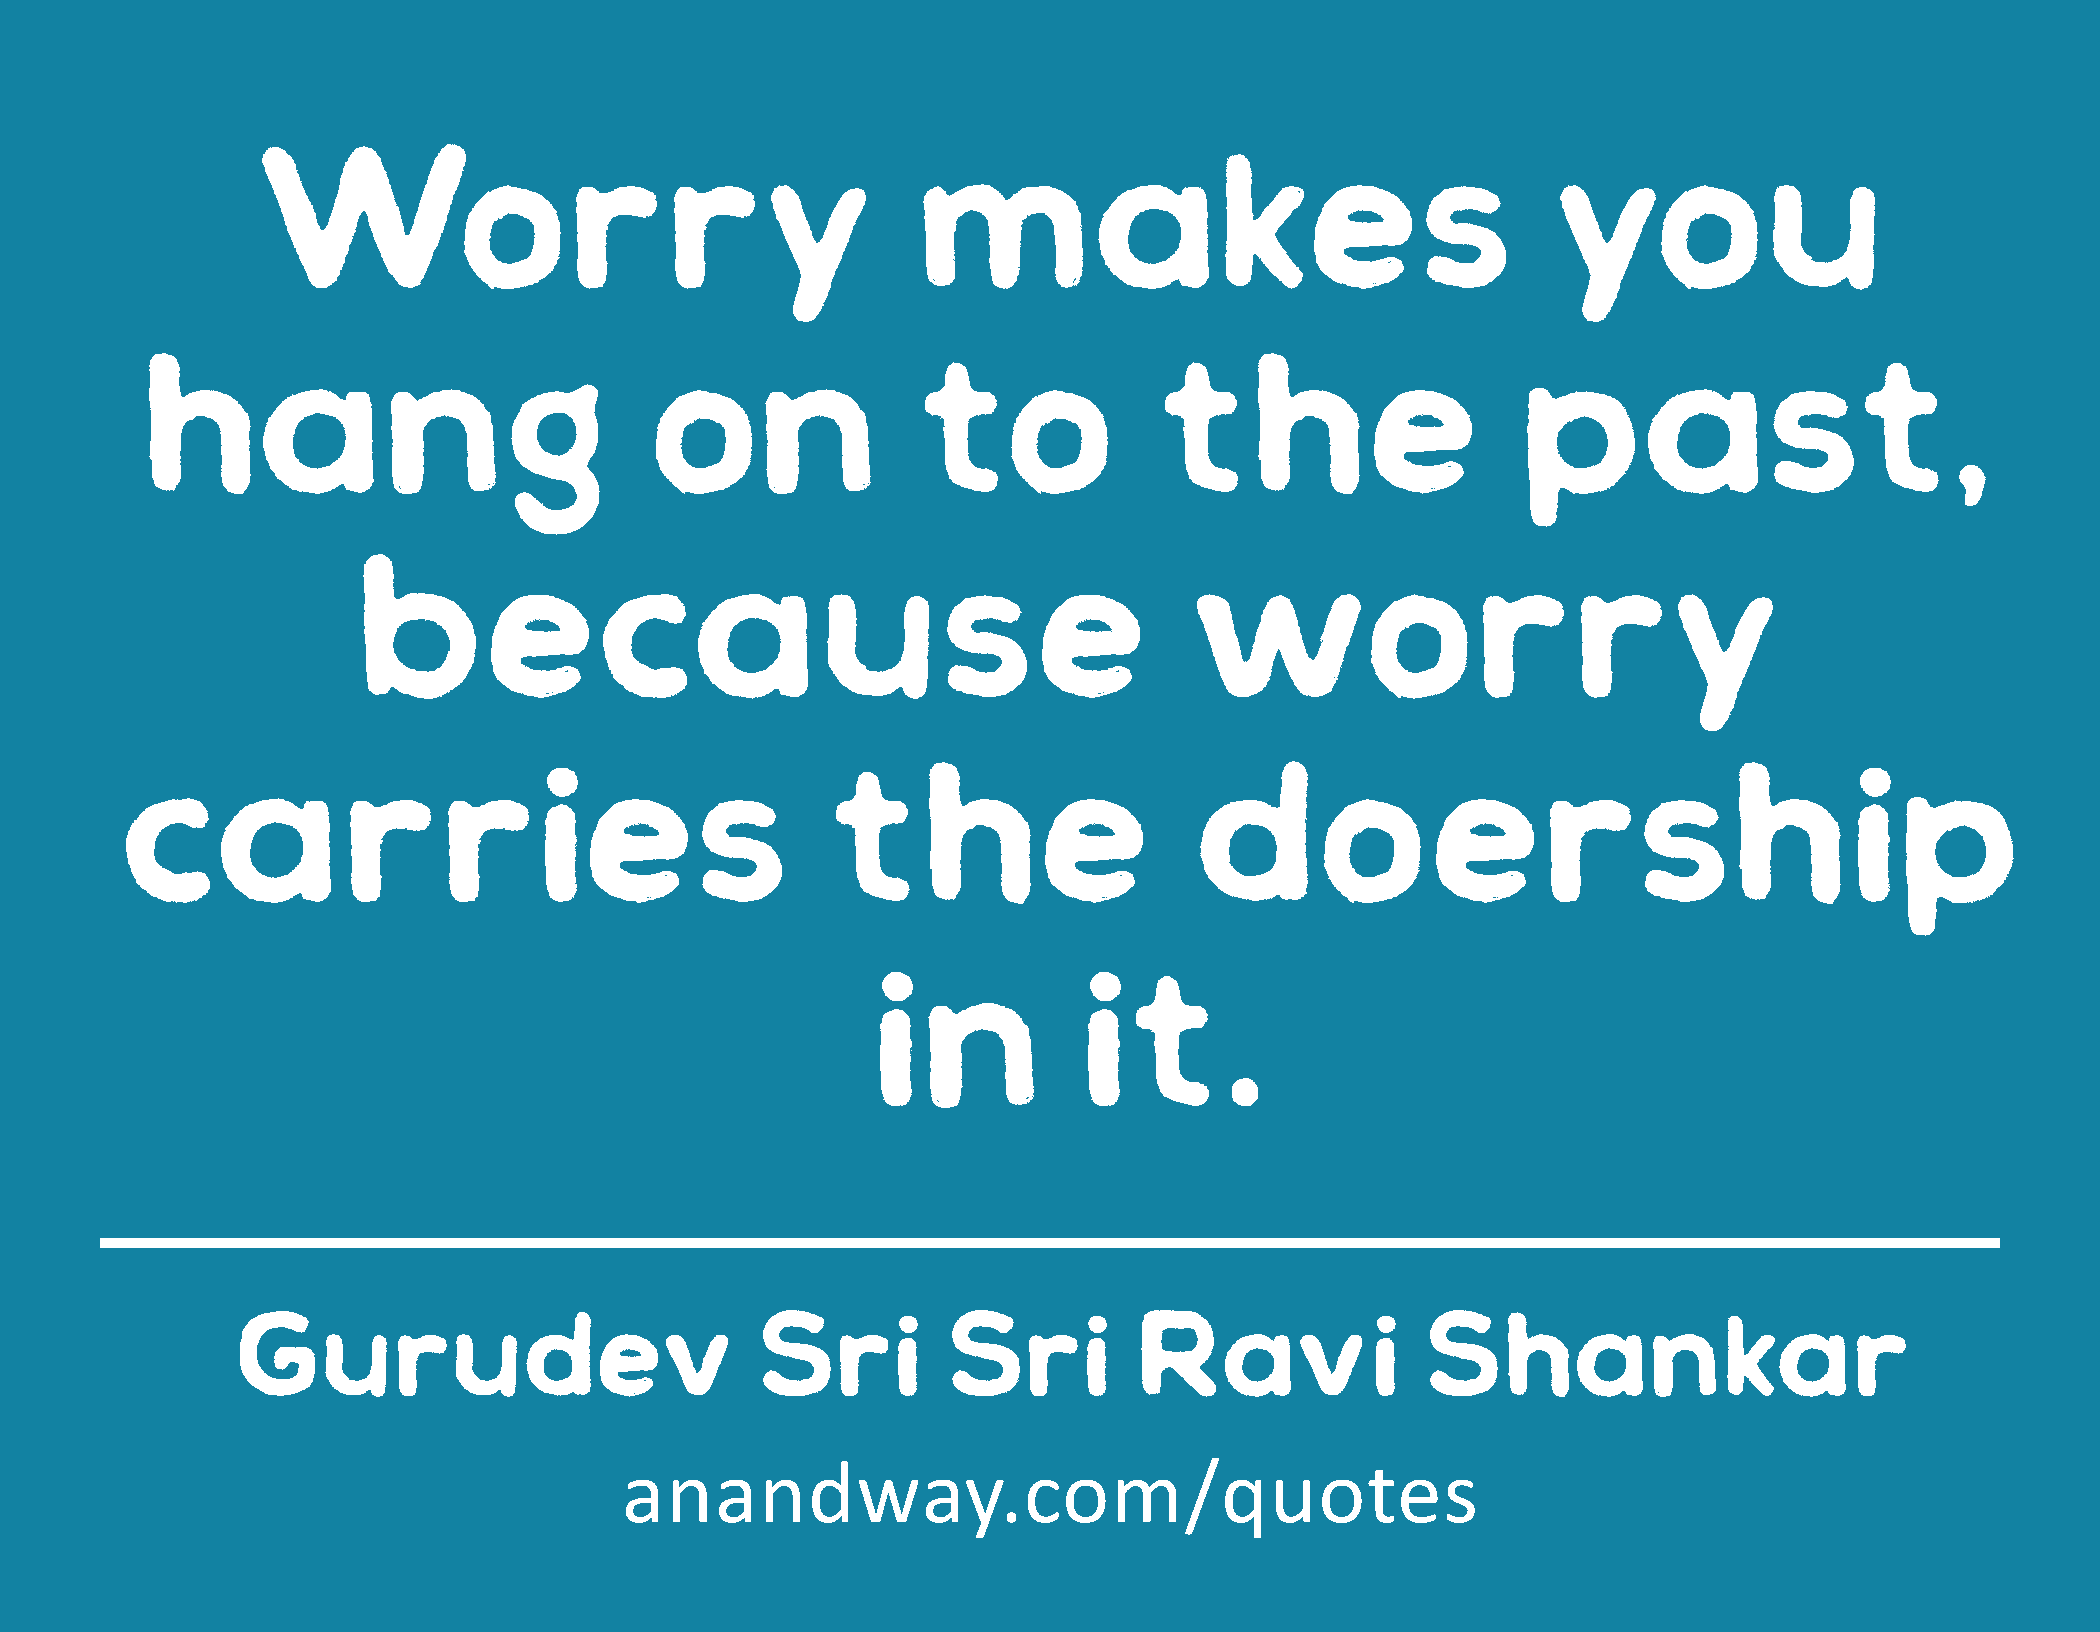 Worry makes you hang on to the past, because worry carries the doership in it. 
 -Gurudev Sri Sri Ravi Shankar